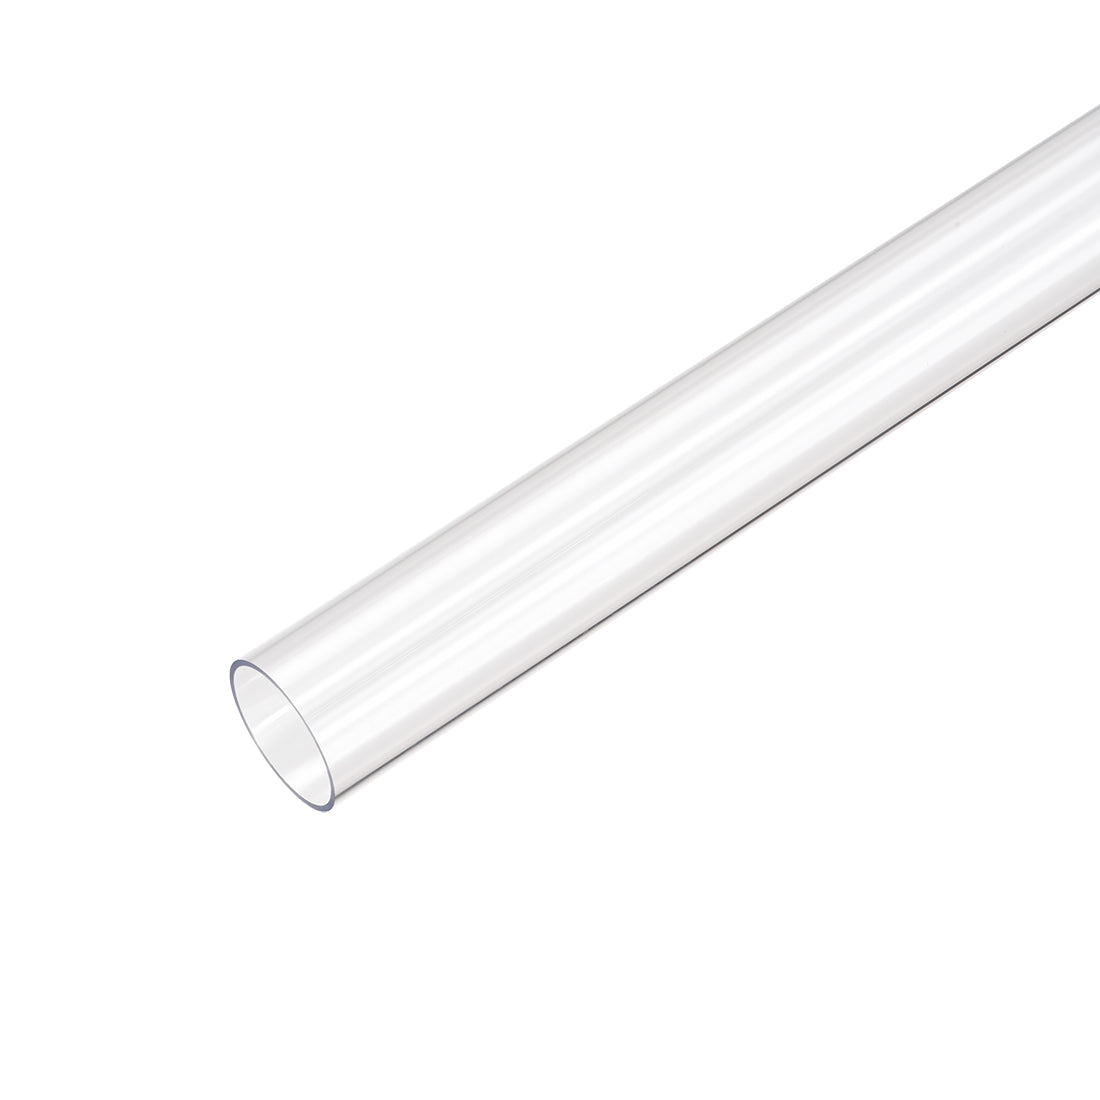 uxcell Uxcell PVC Rigid Round Tubing,Clear,15mm ID x 16mm OD,0.5M/1.64Ft Length